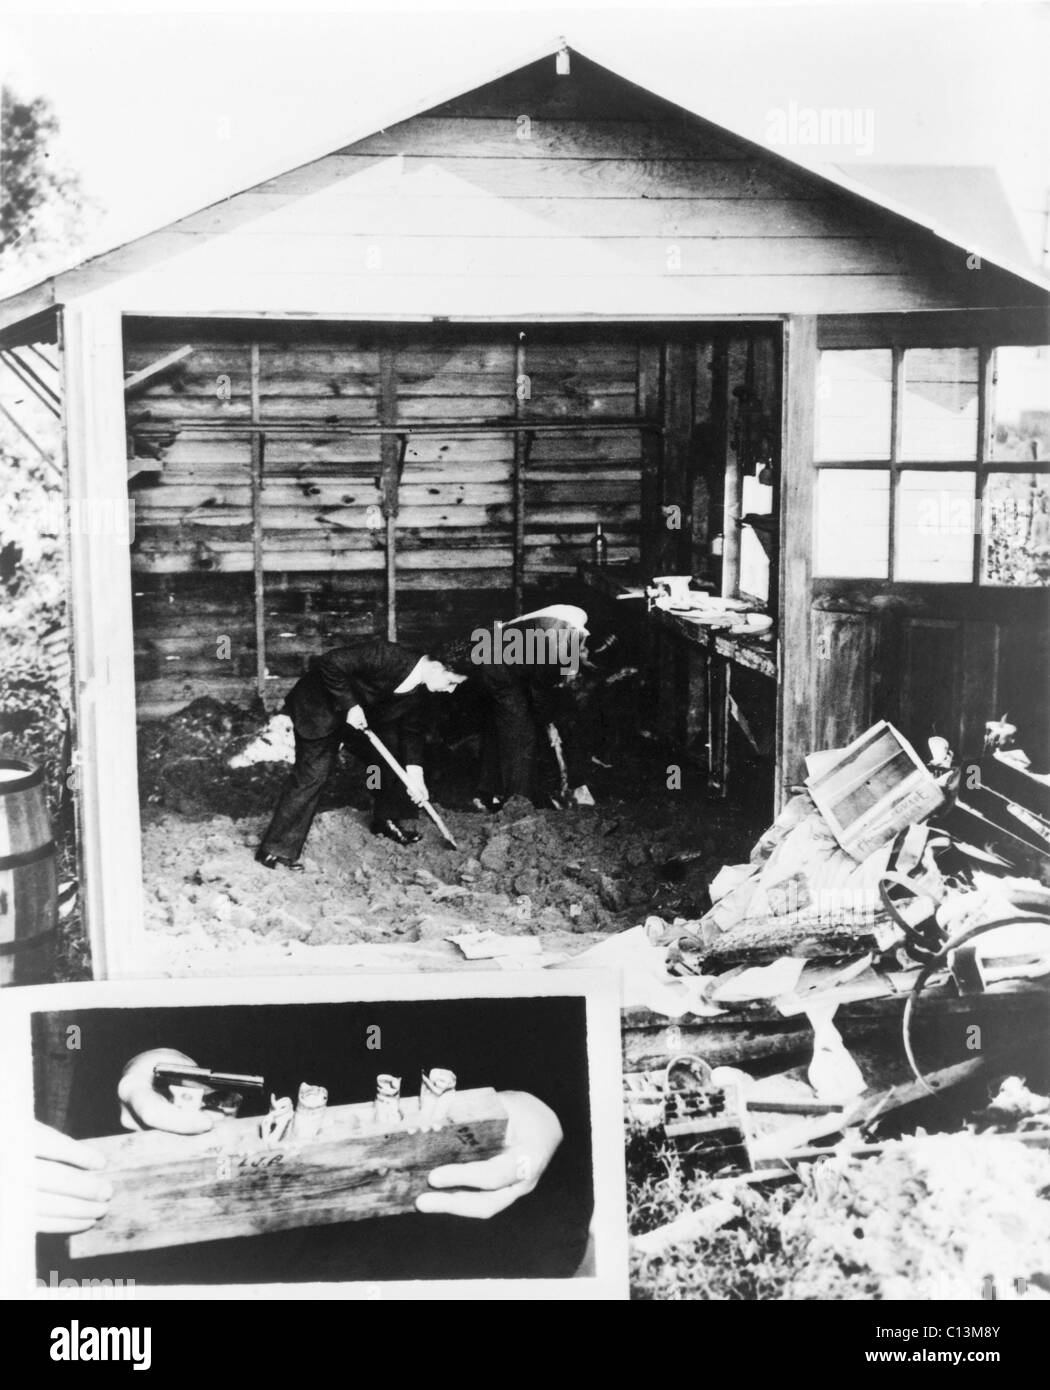 Police digging up the garage floor of accused Lindbergh baby kidnapper Bruno Richard Hauptmann searching for ransom money. Insert photo shows the piece of timber in which some of the marked bills and a gun were hidden. September 1934. Stock Photo